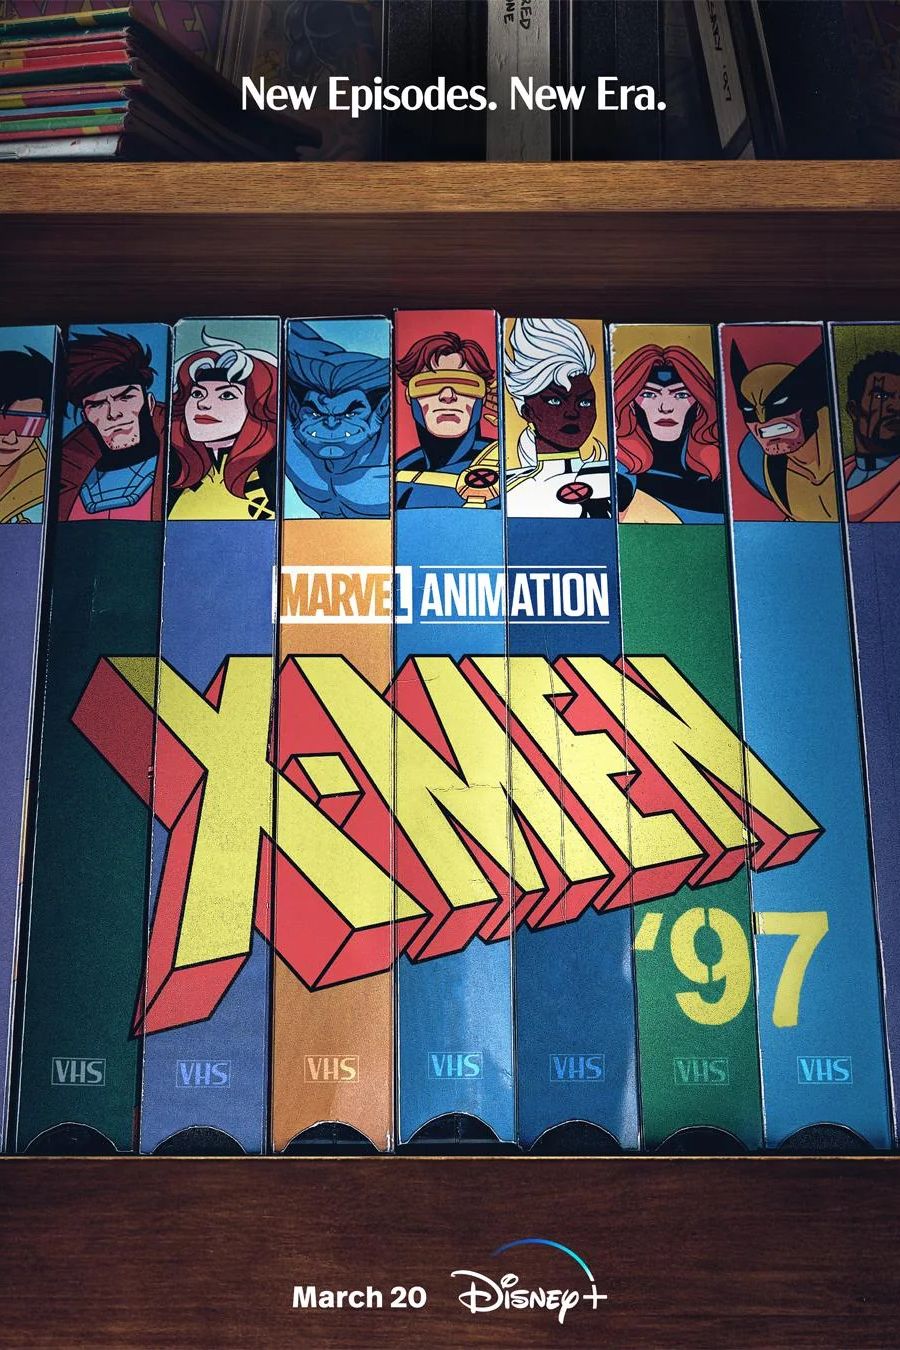 X-Men ’97 Episode 9 Just Made Gambit's Death Even Sadder In Time For ...